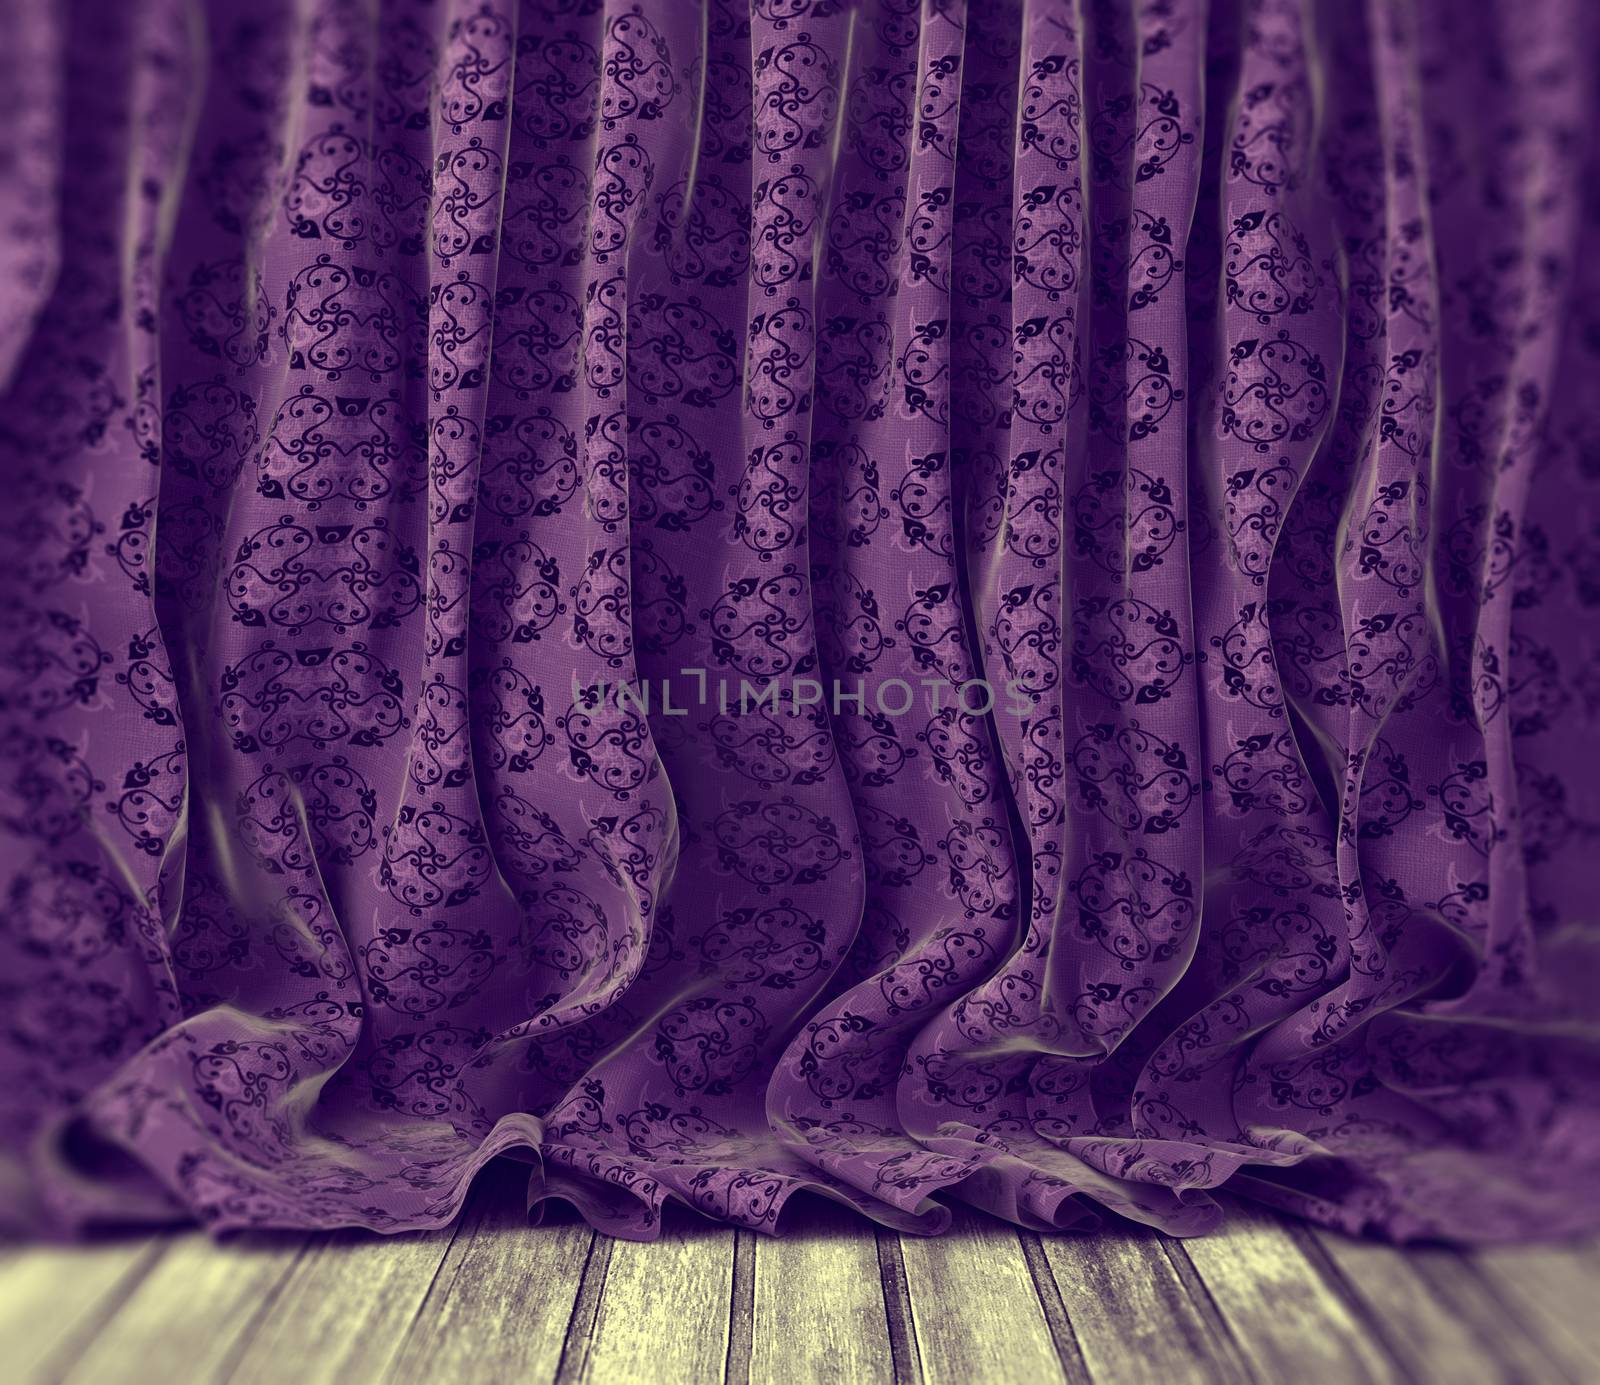 Retro purple floral curtains background anad wood floor background